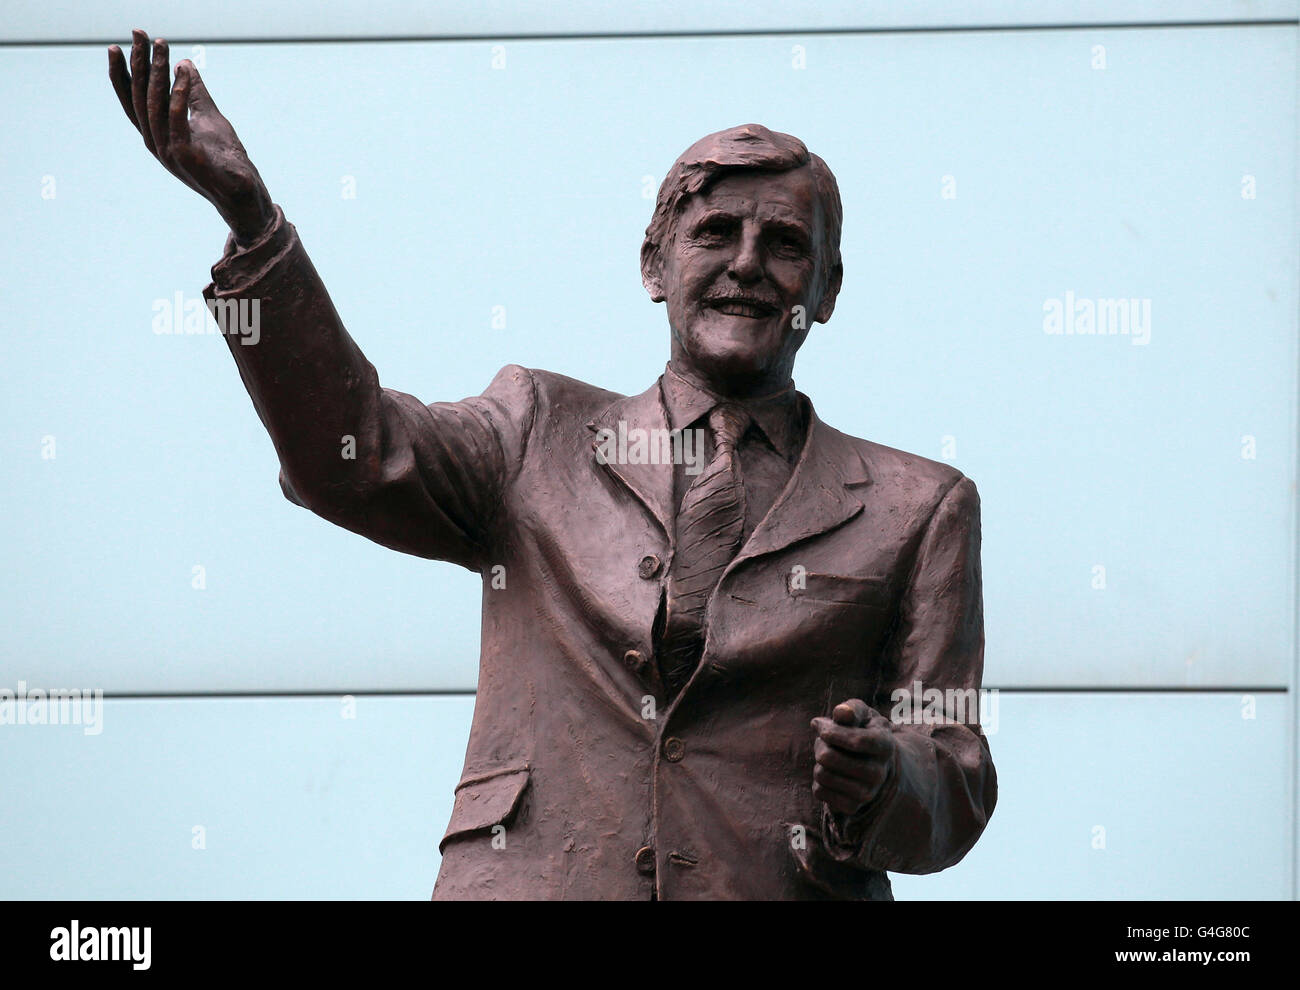 Soccer - npower Football League Championship - Coventry City v Leicester City - Ricoh Arena. Statue of Jimmy Hill outside the Ricoh Arena Stock Photo